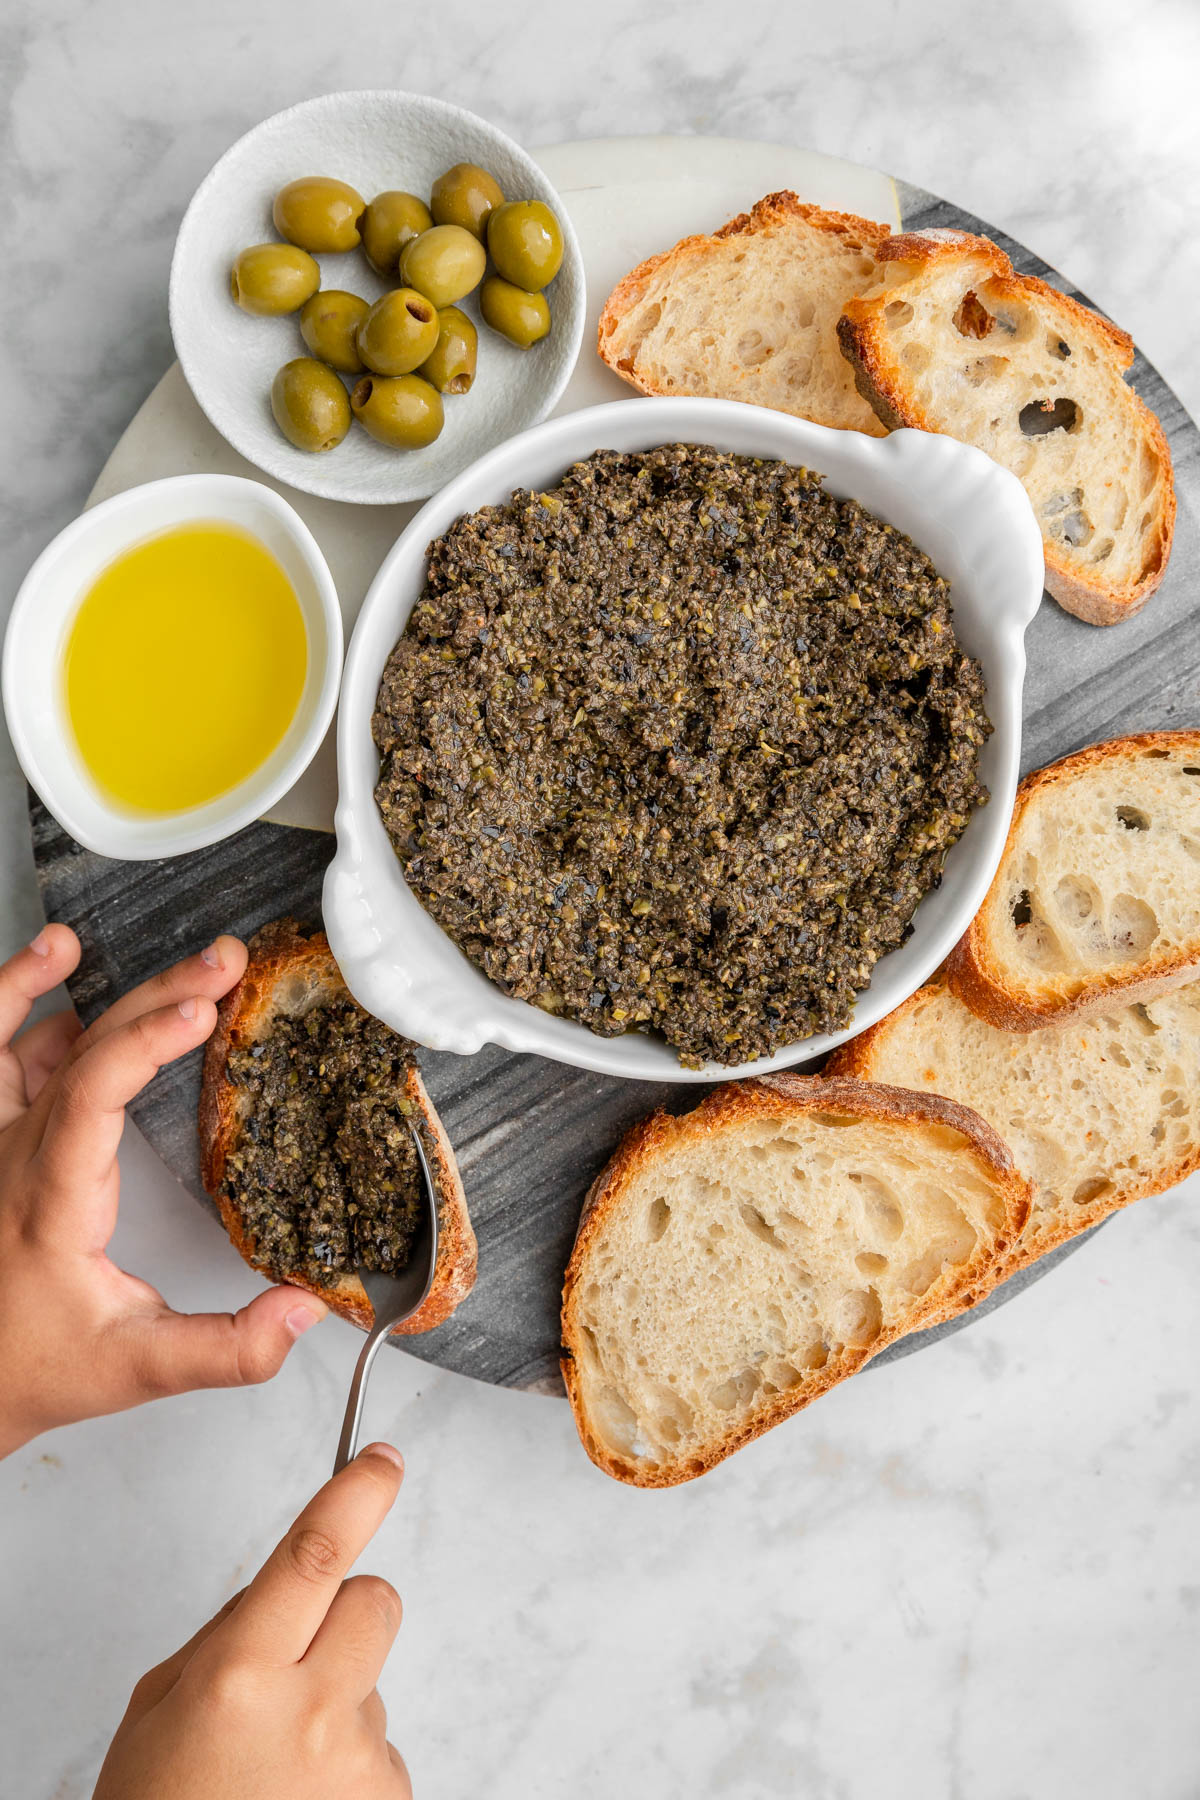 Kids hand holding a piece of bread and spreading olive tapenade on it.